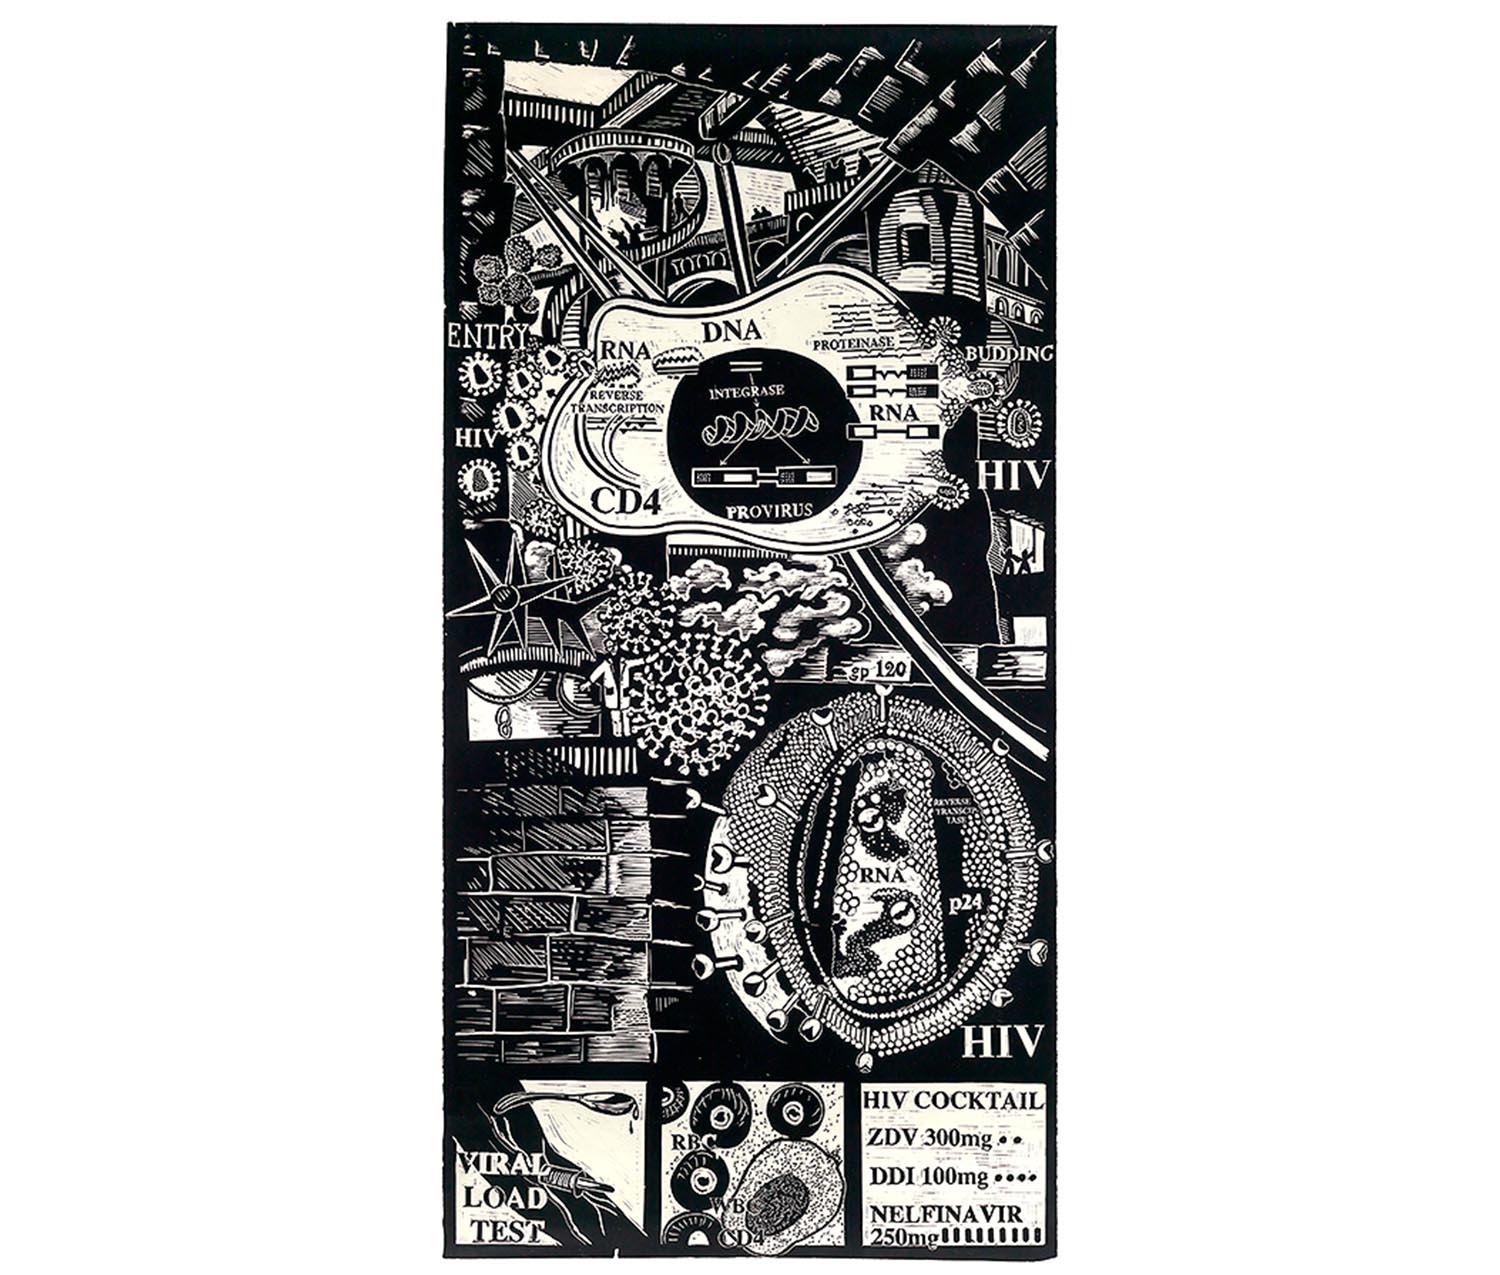 black and white print featuring houses, figures on balconies and stairs, AIDS virus cells of various sizes, clouds with interspersed words